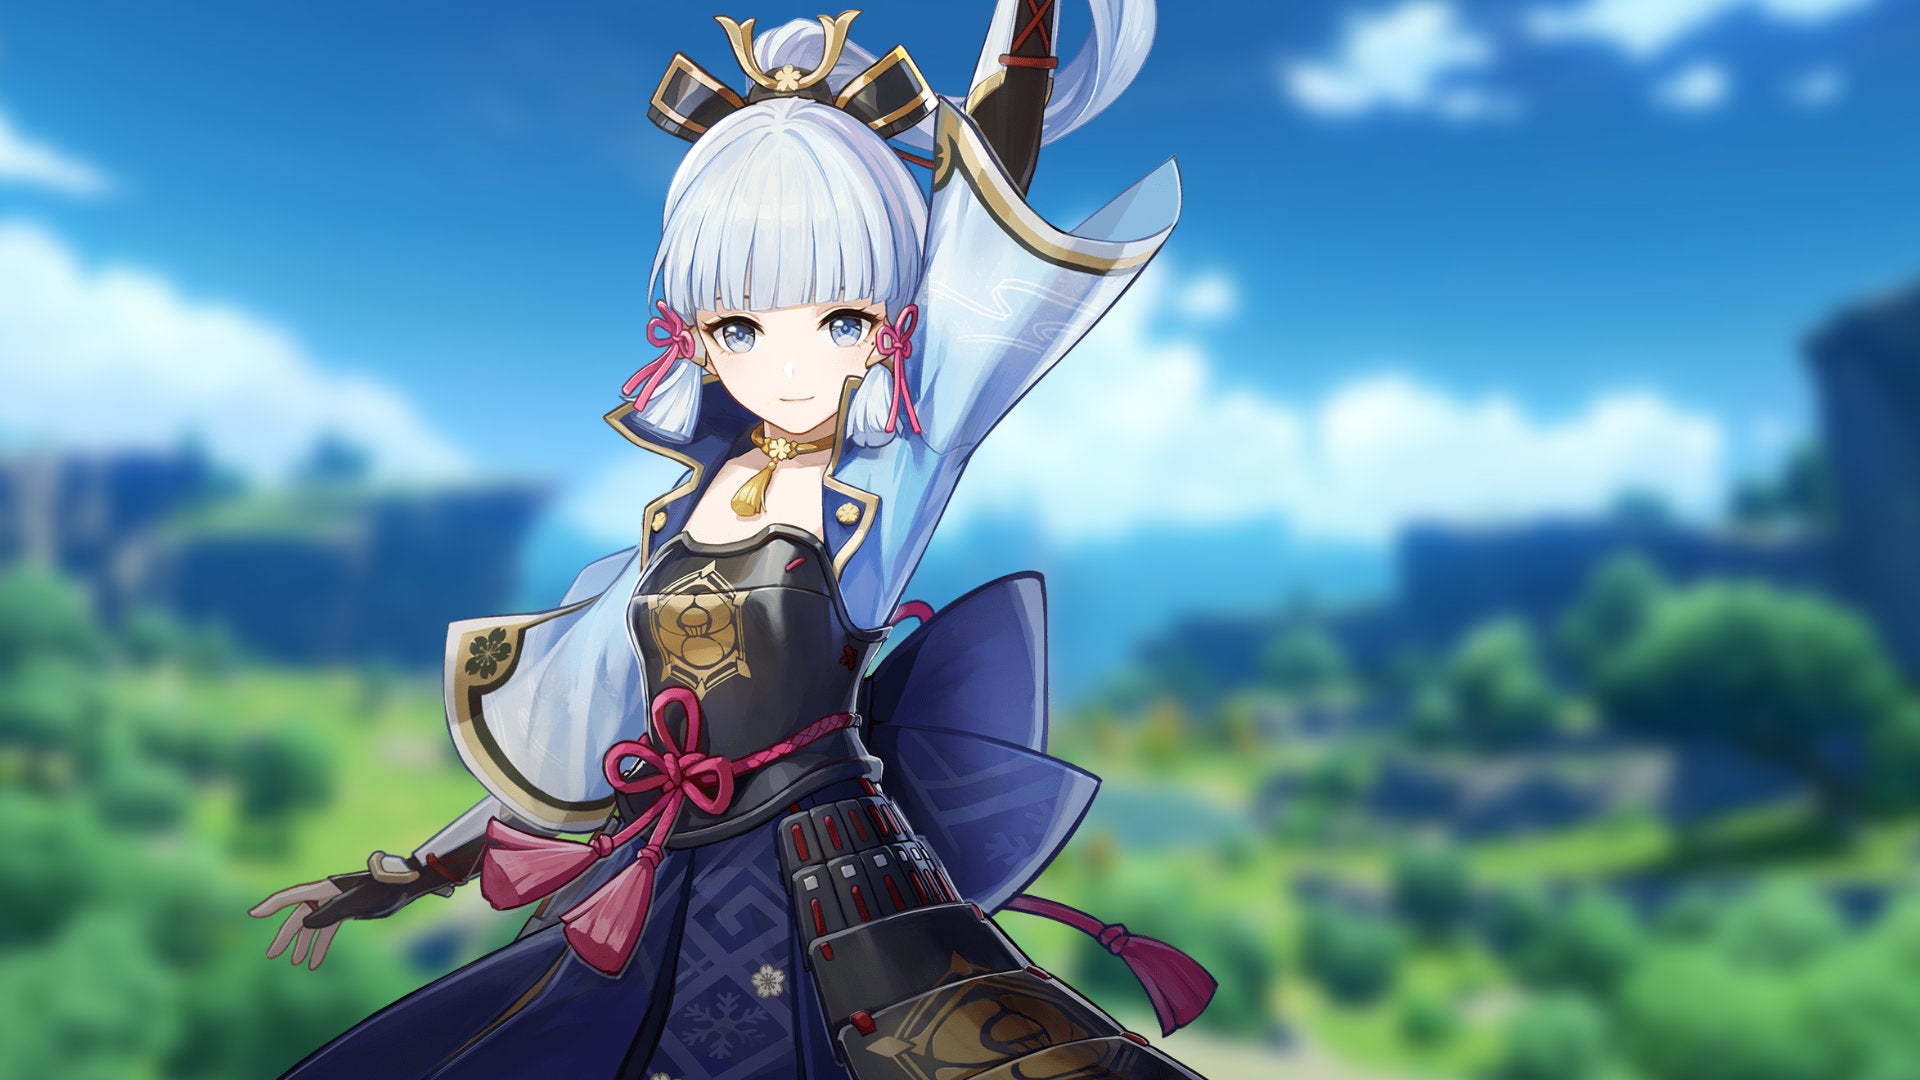 Promotional art of the character Ayaka from Genshin Impact.